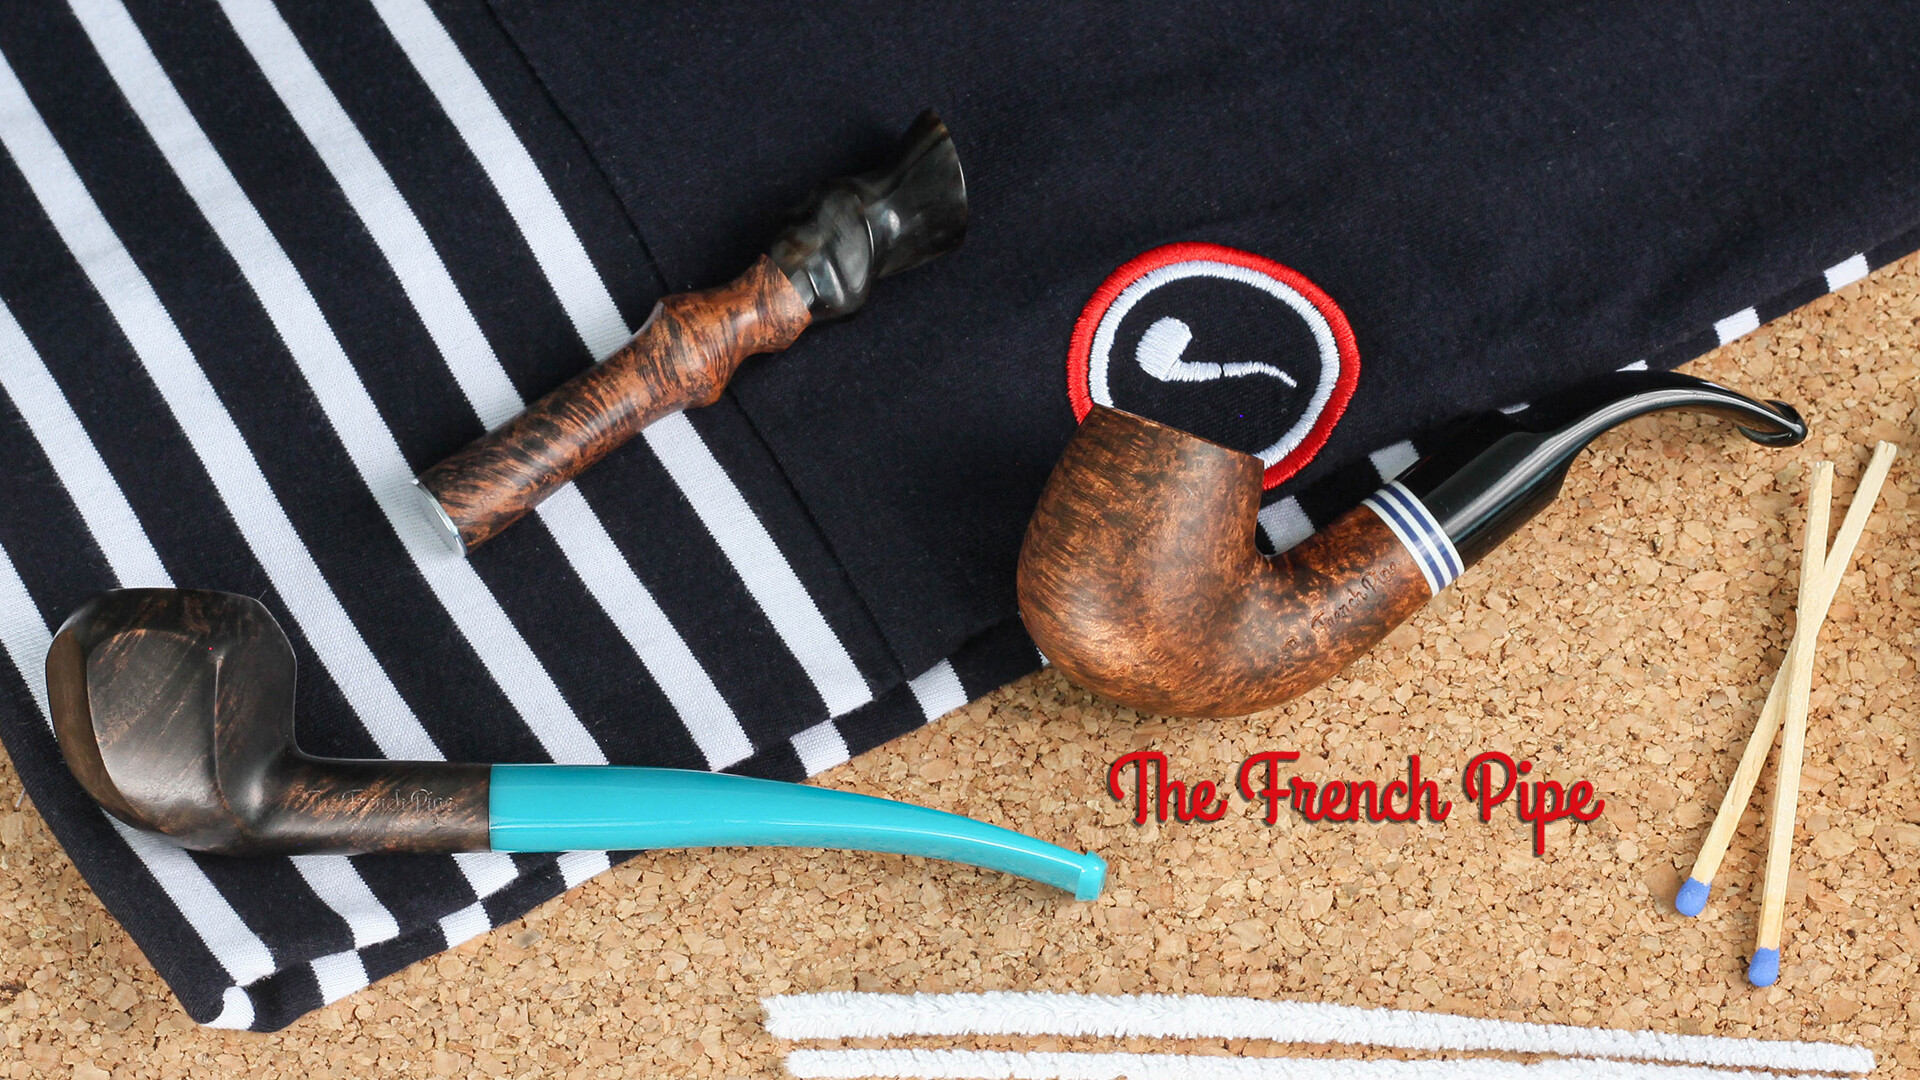 The French Pipe